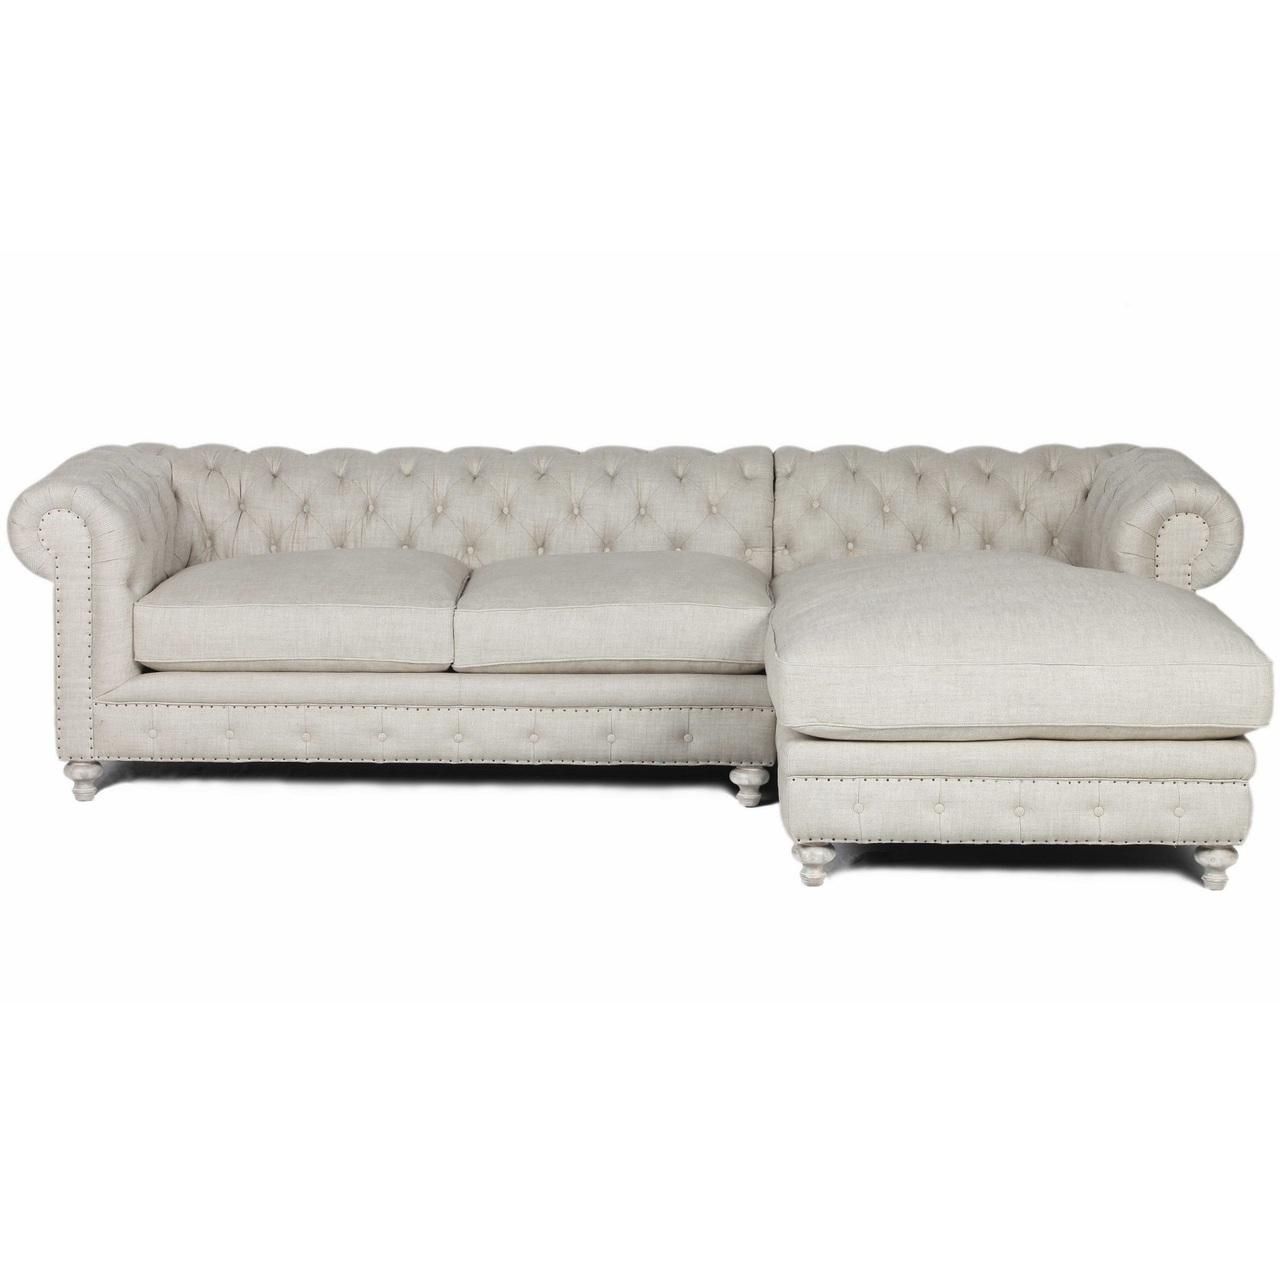 Sofa: Cheap Sectionals | Velvet Tufted Sofa | Tufted Sectional Sofa Throughout Tufted Sectional Sofa Chaise (View 8 of 20)